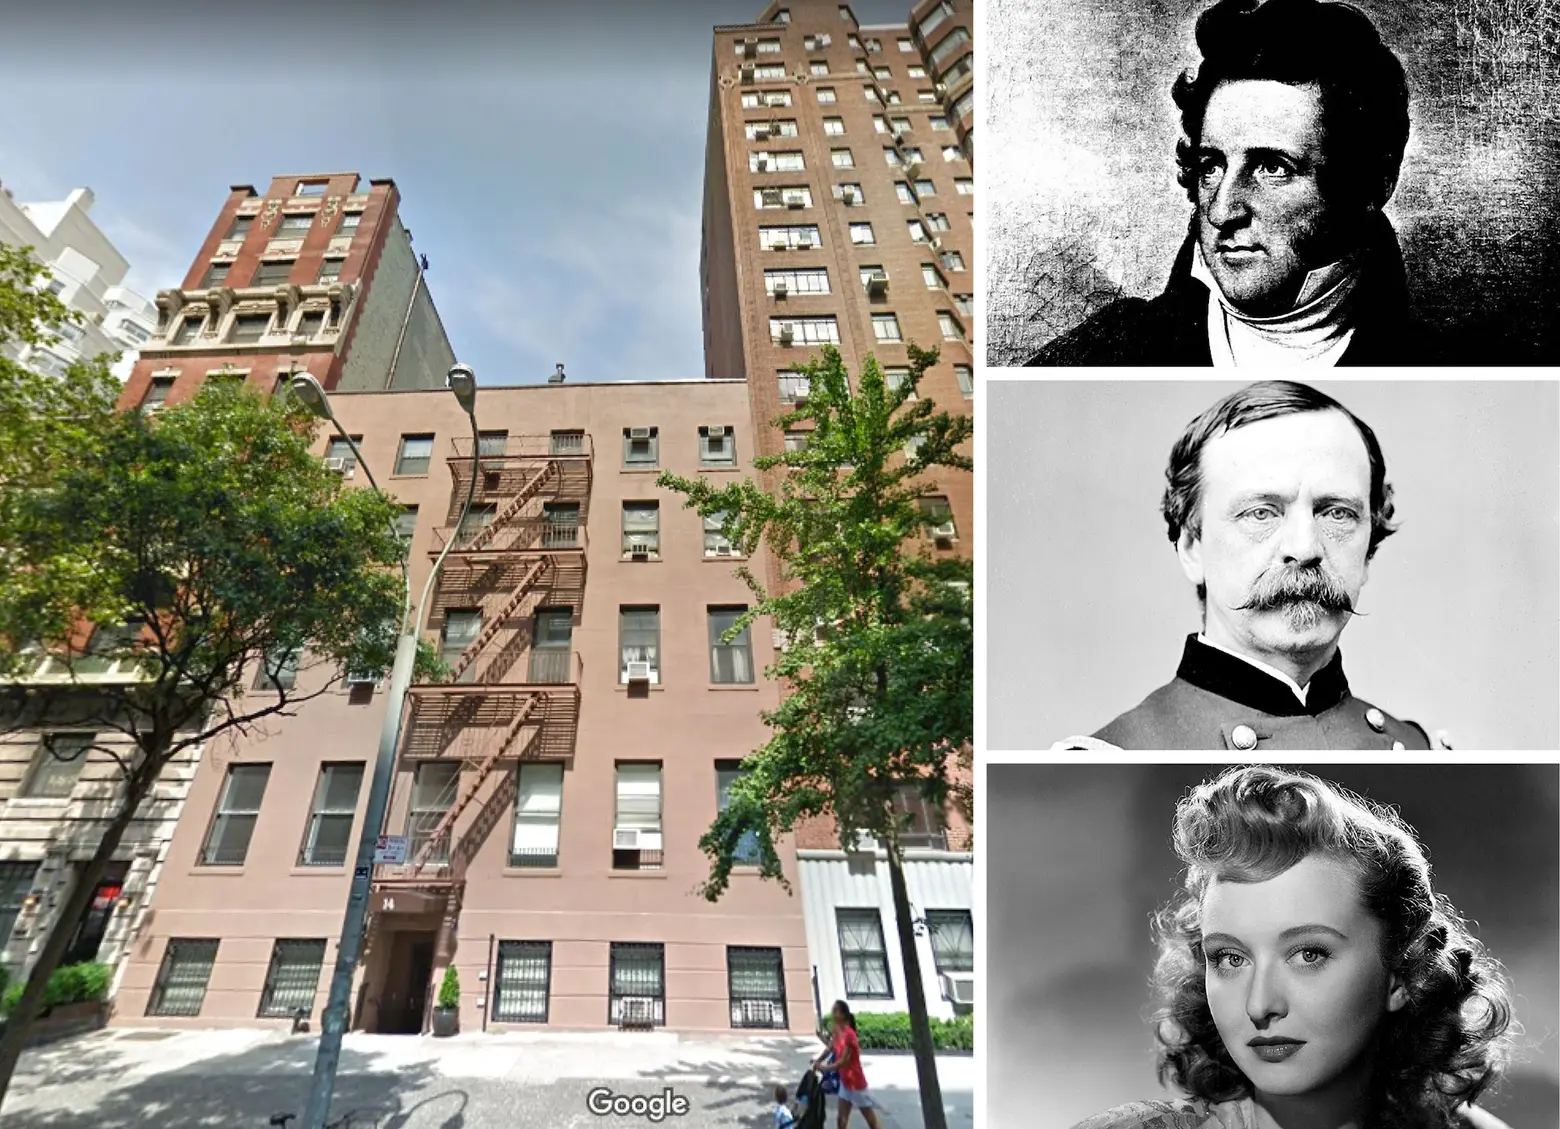 From Civil War generals to Oscar winners: 7 historic figures who called 14-16 Fifth Avenue home